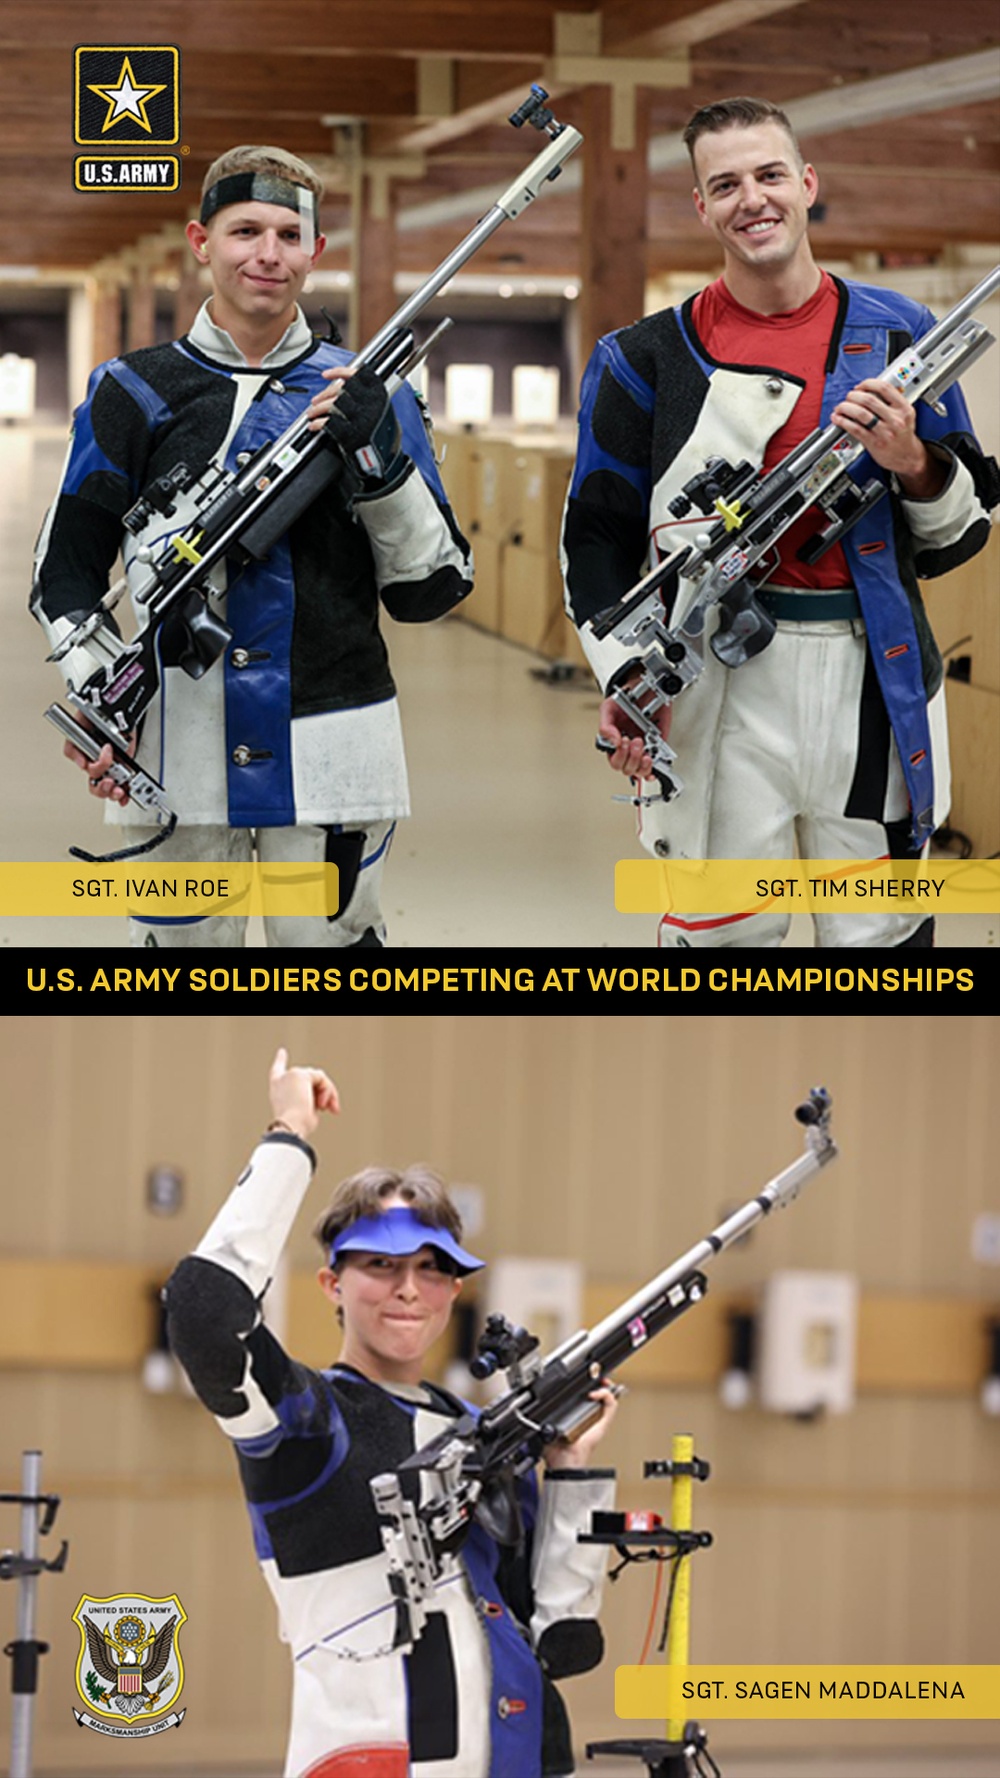 US Army Soldiers will Compete at Rifle World Championships in Egypt